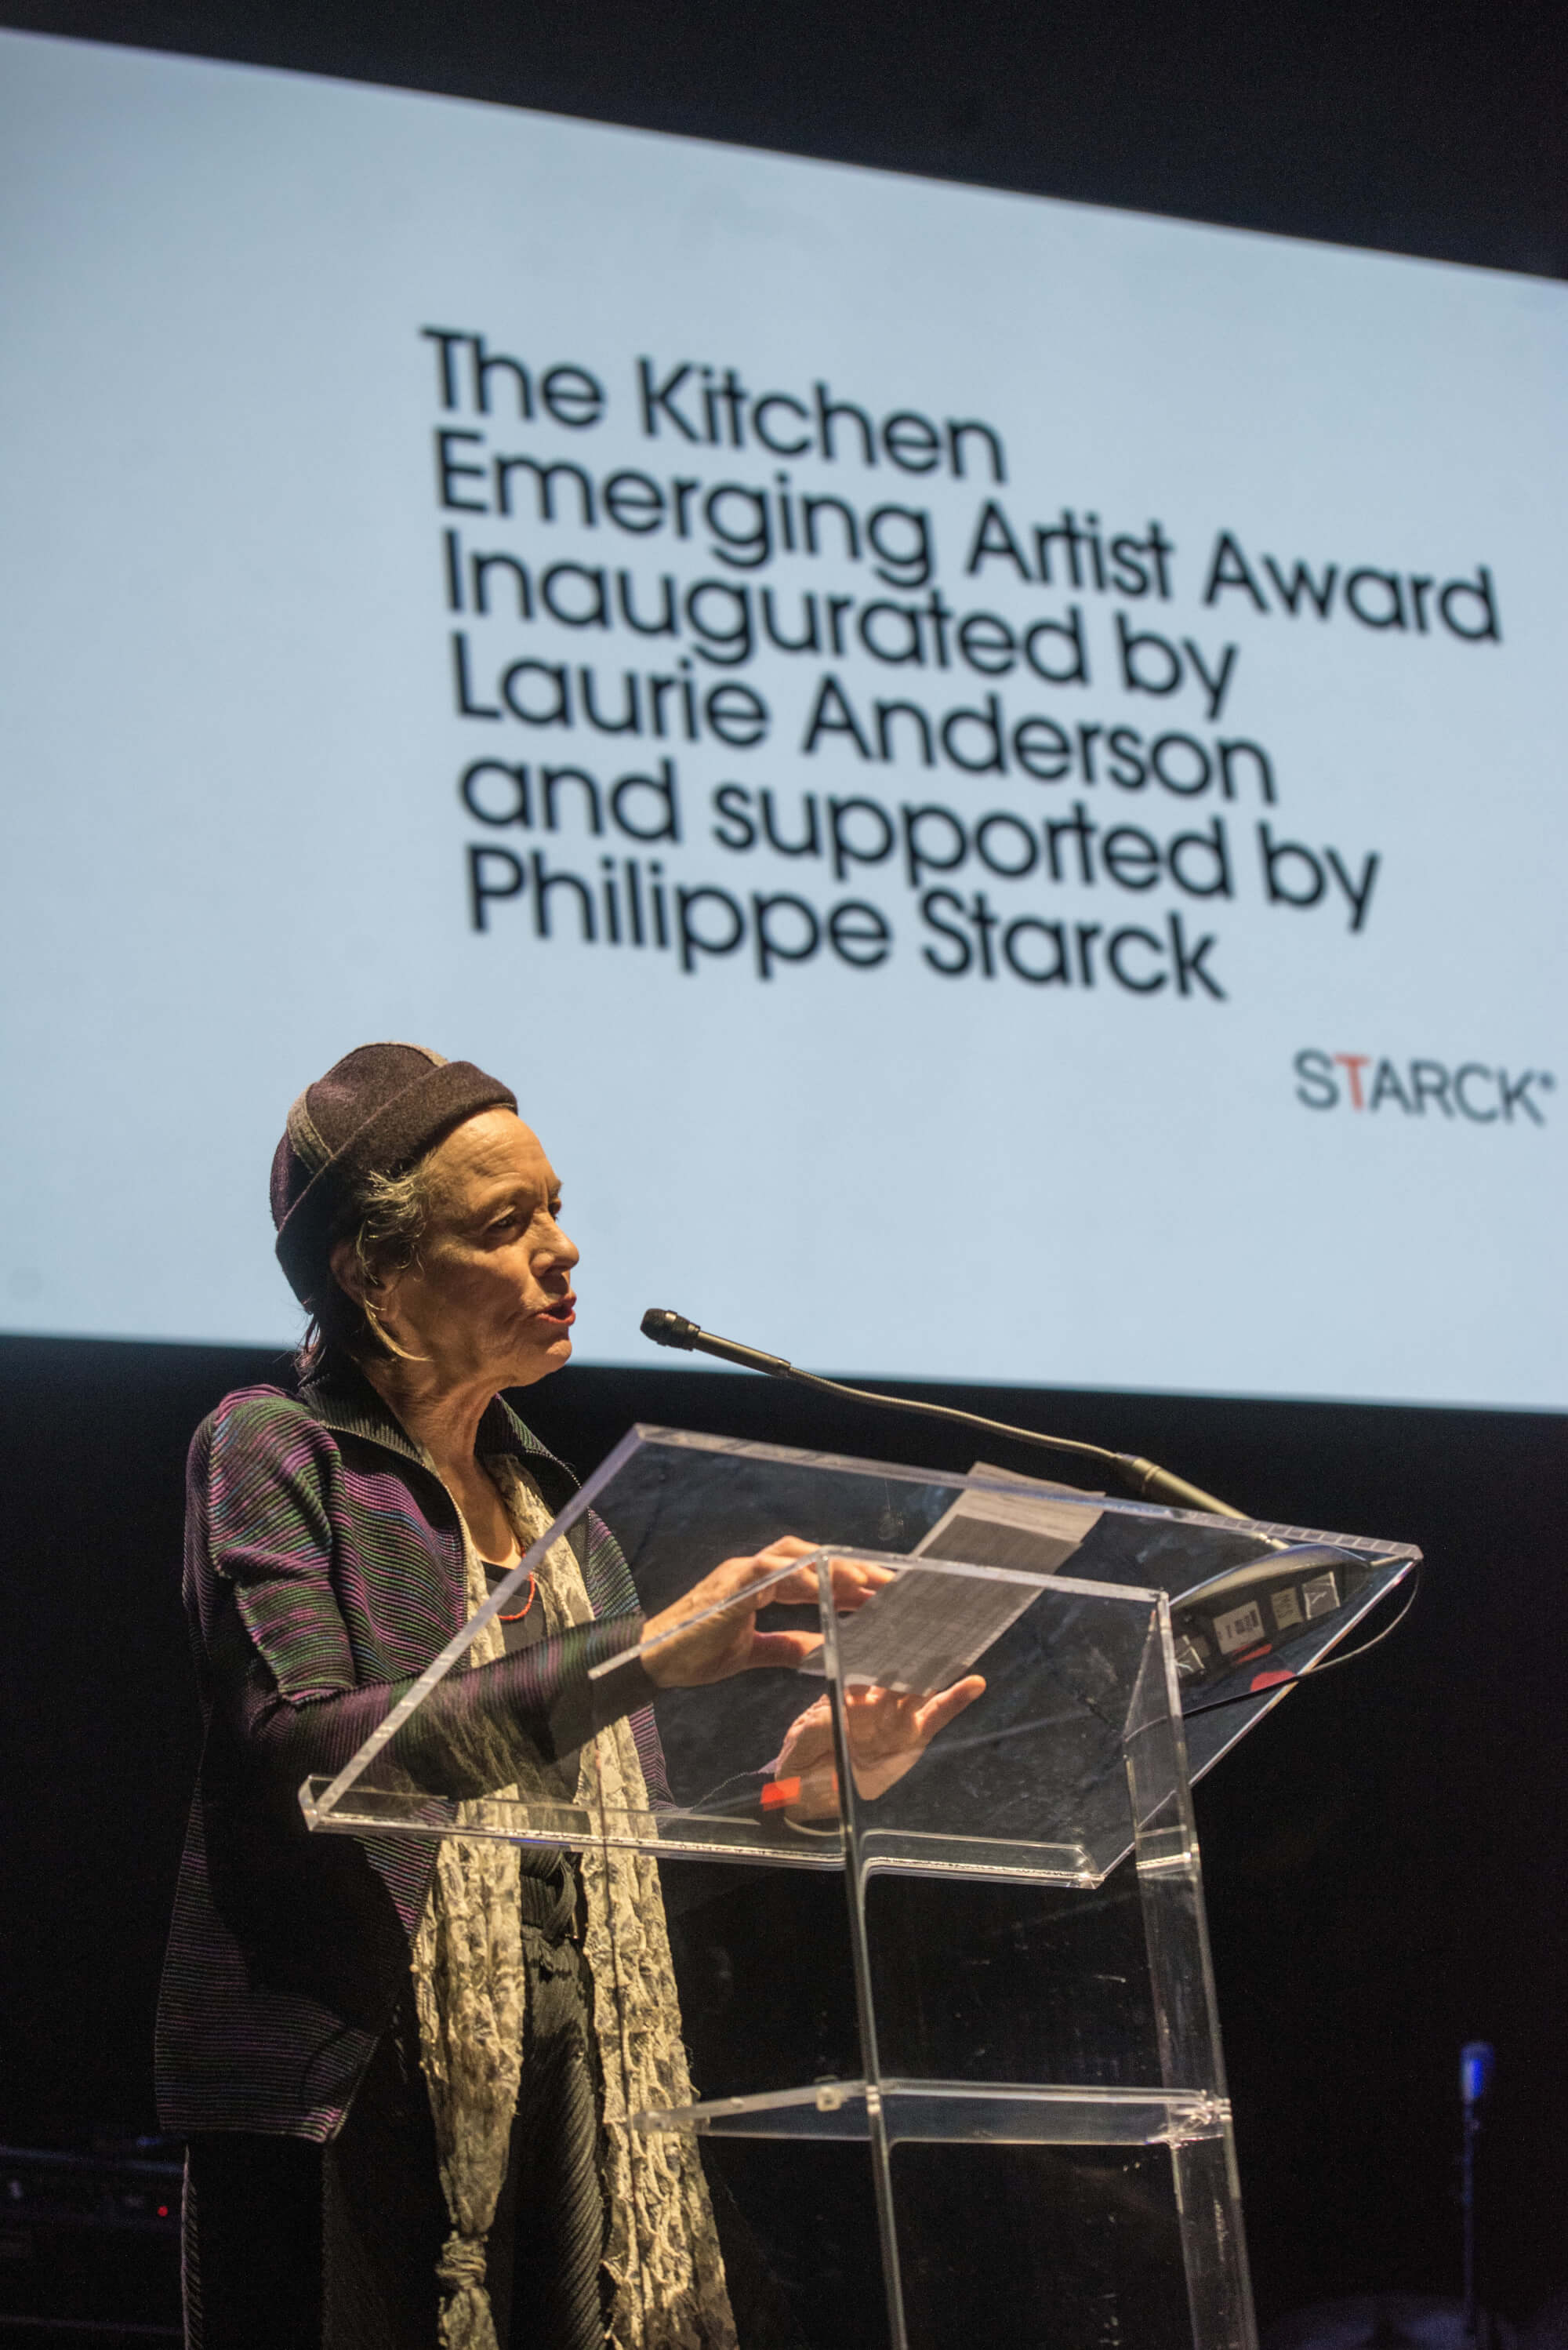 Starck supports the first The Kitchen Emerging Artist Award inaugurated by artist Laurie Anderson - 